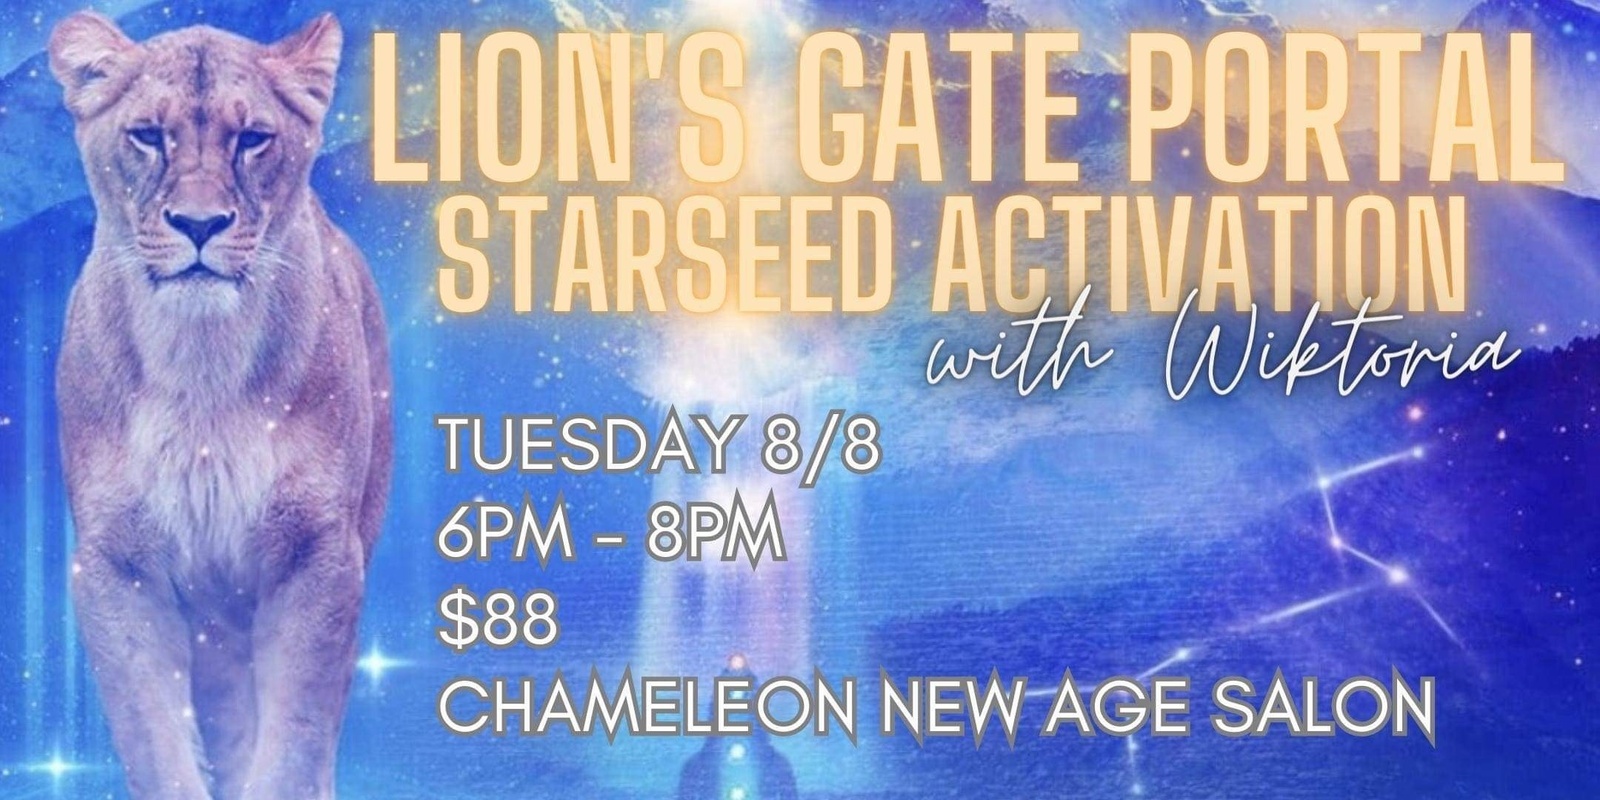 Banner image for Lions Gate Portal - Starseed Activation